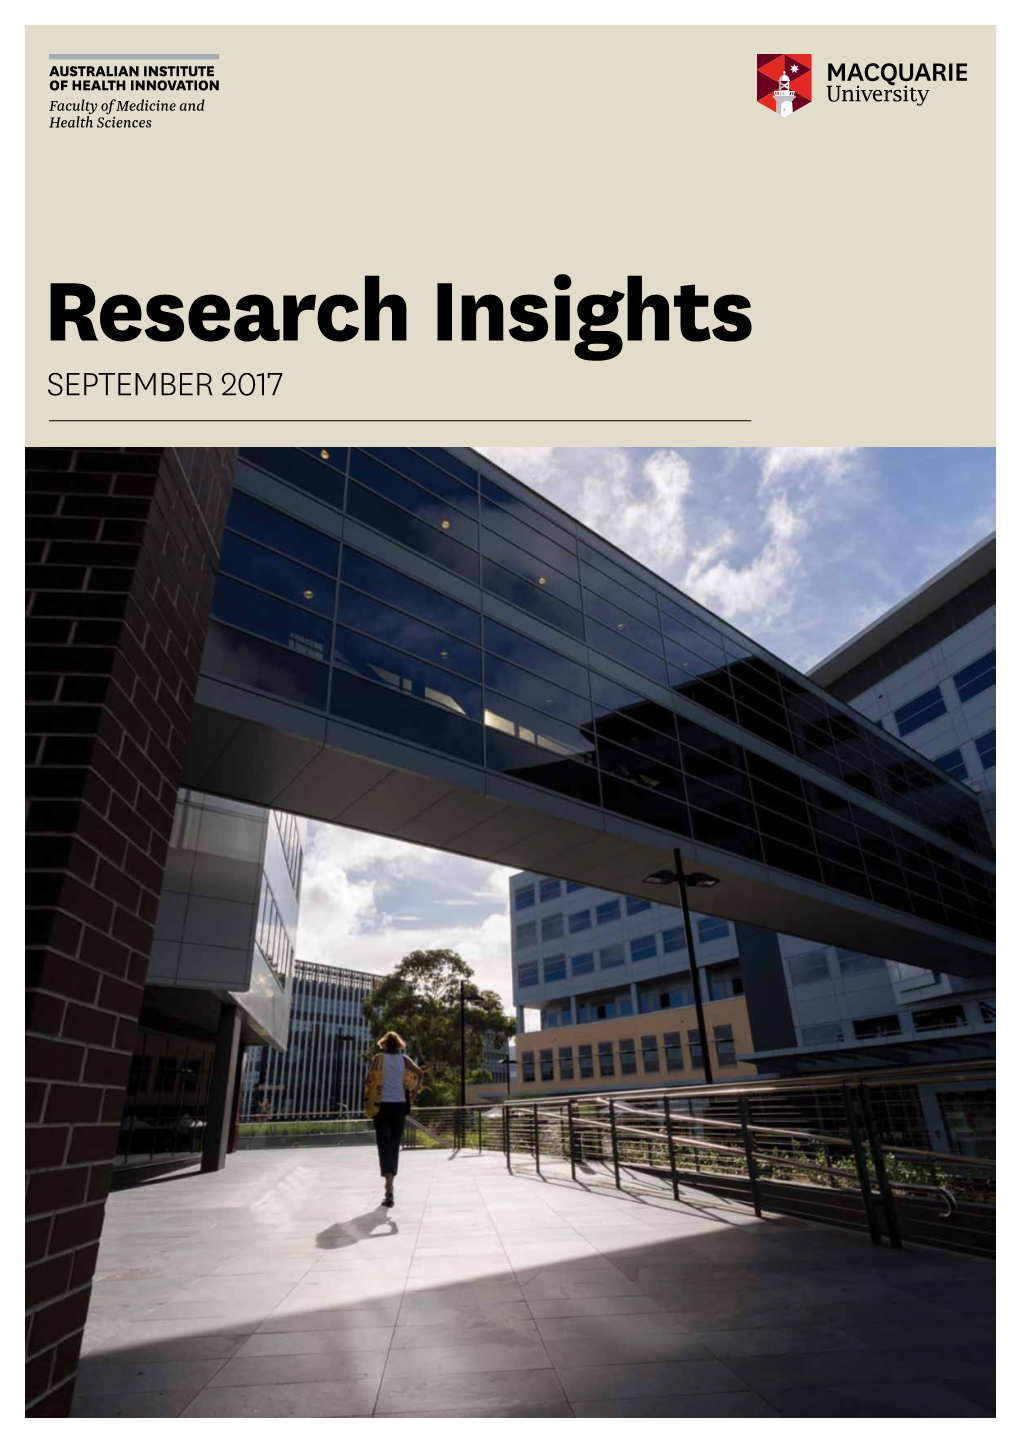 Research Insights SEPTEMBER 2017 2 Australian Institute of Health Innovation Research Insights